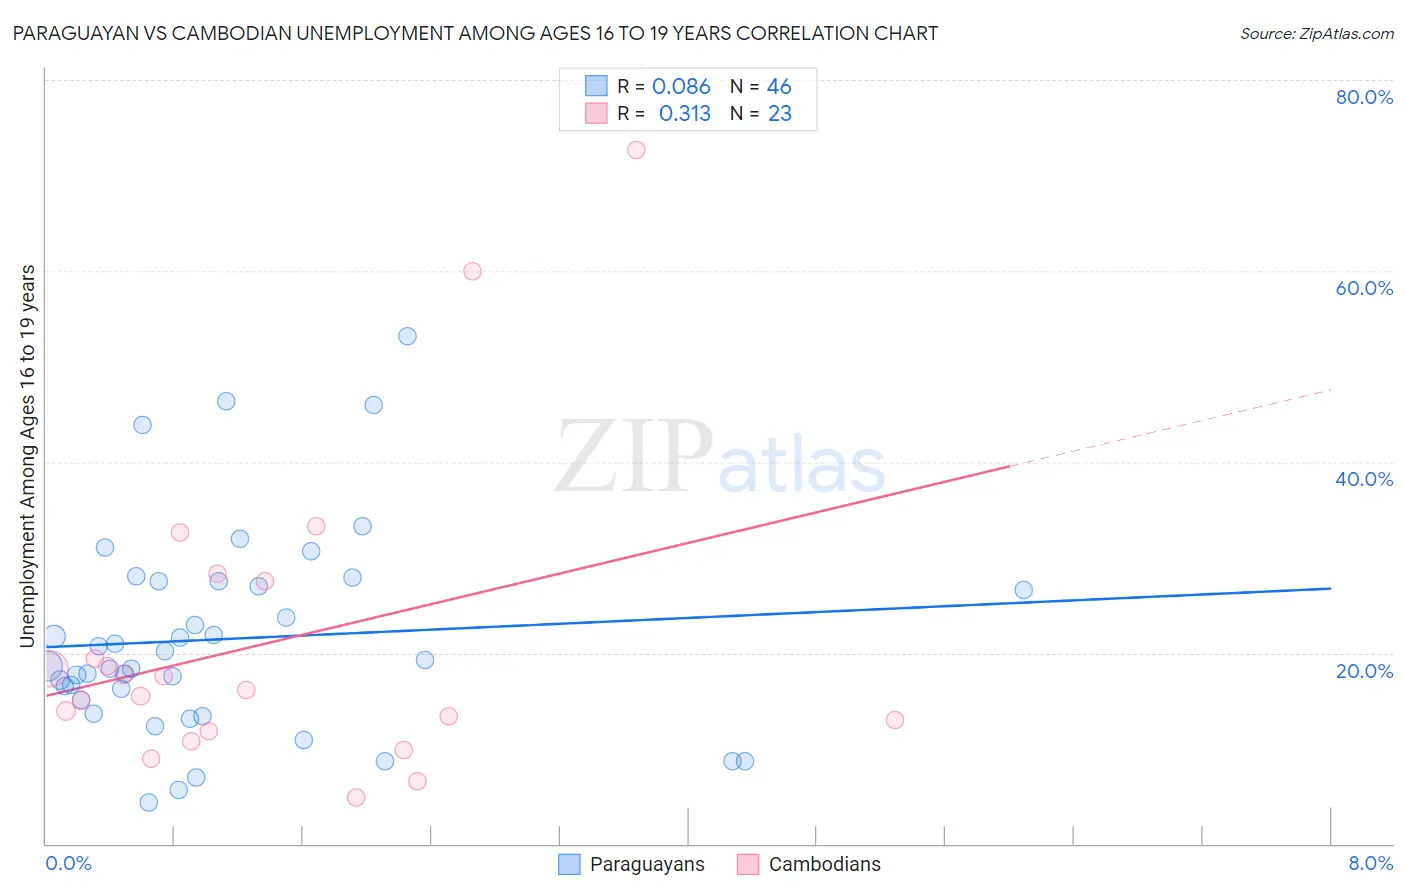 Paraguayan vs Cambodian Unemployment Among Ages 16 to 19 years